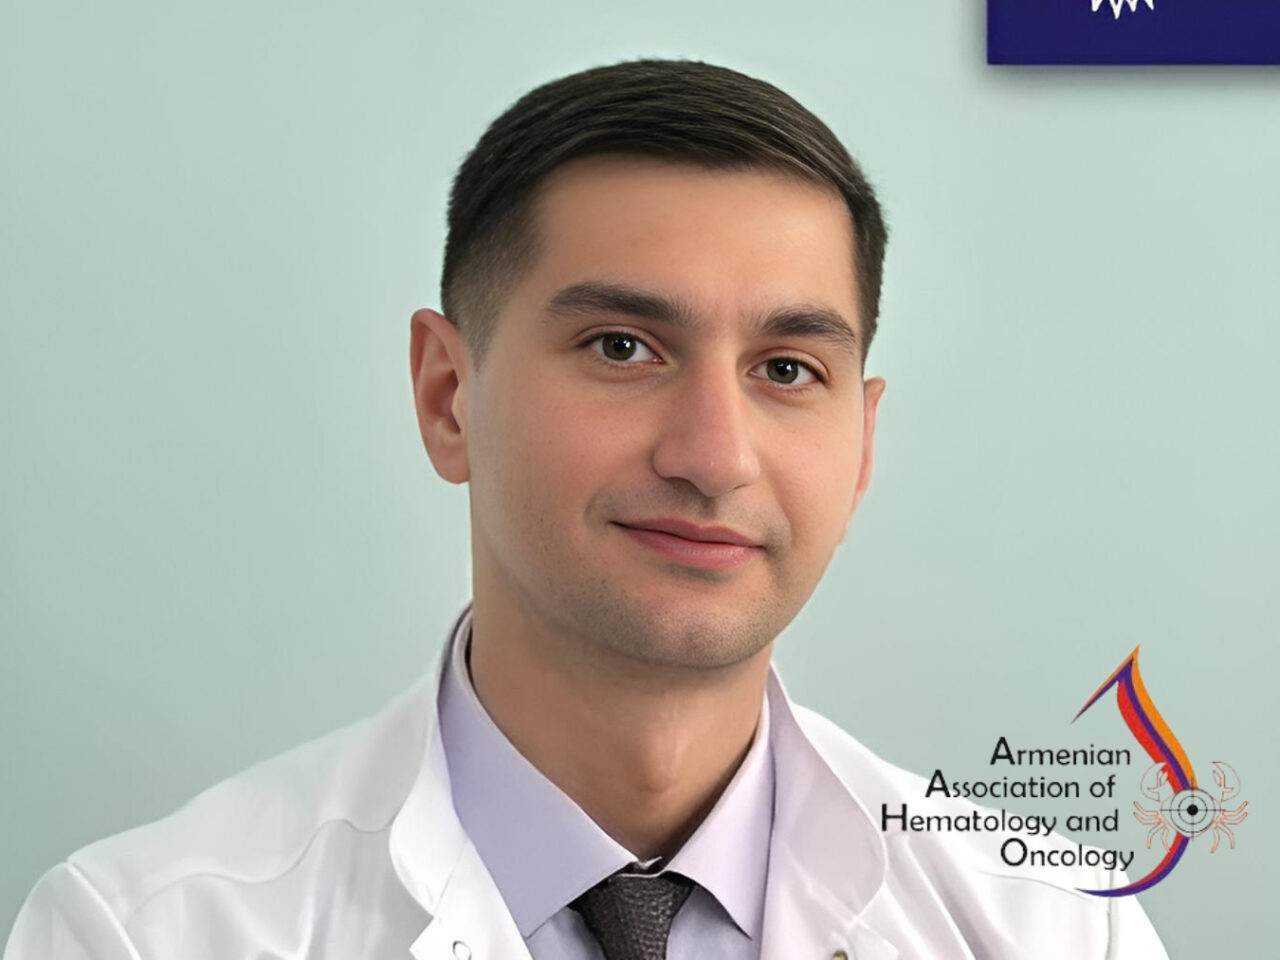 Hayk Grigoryan – elected as the next president of the Armenian Association of Hematology and Oncology